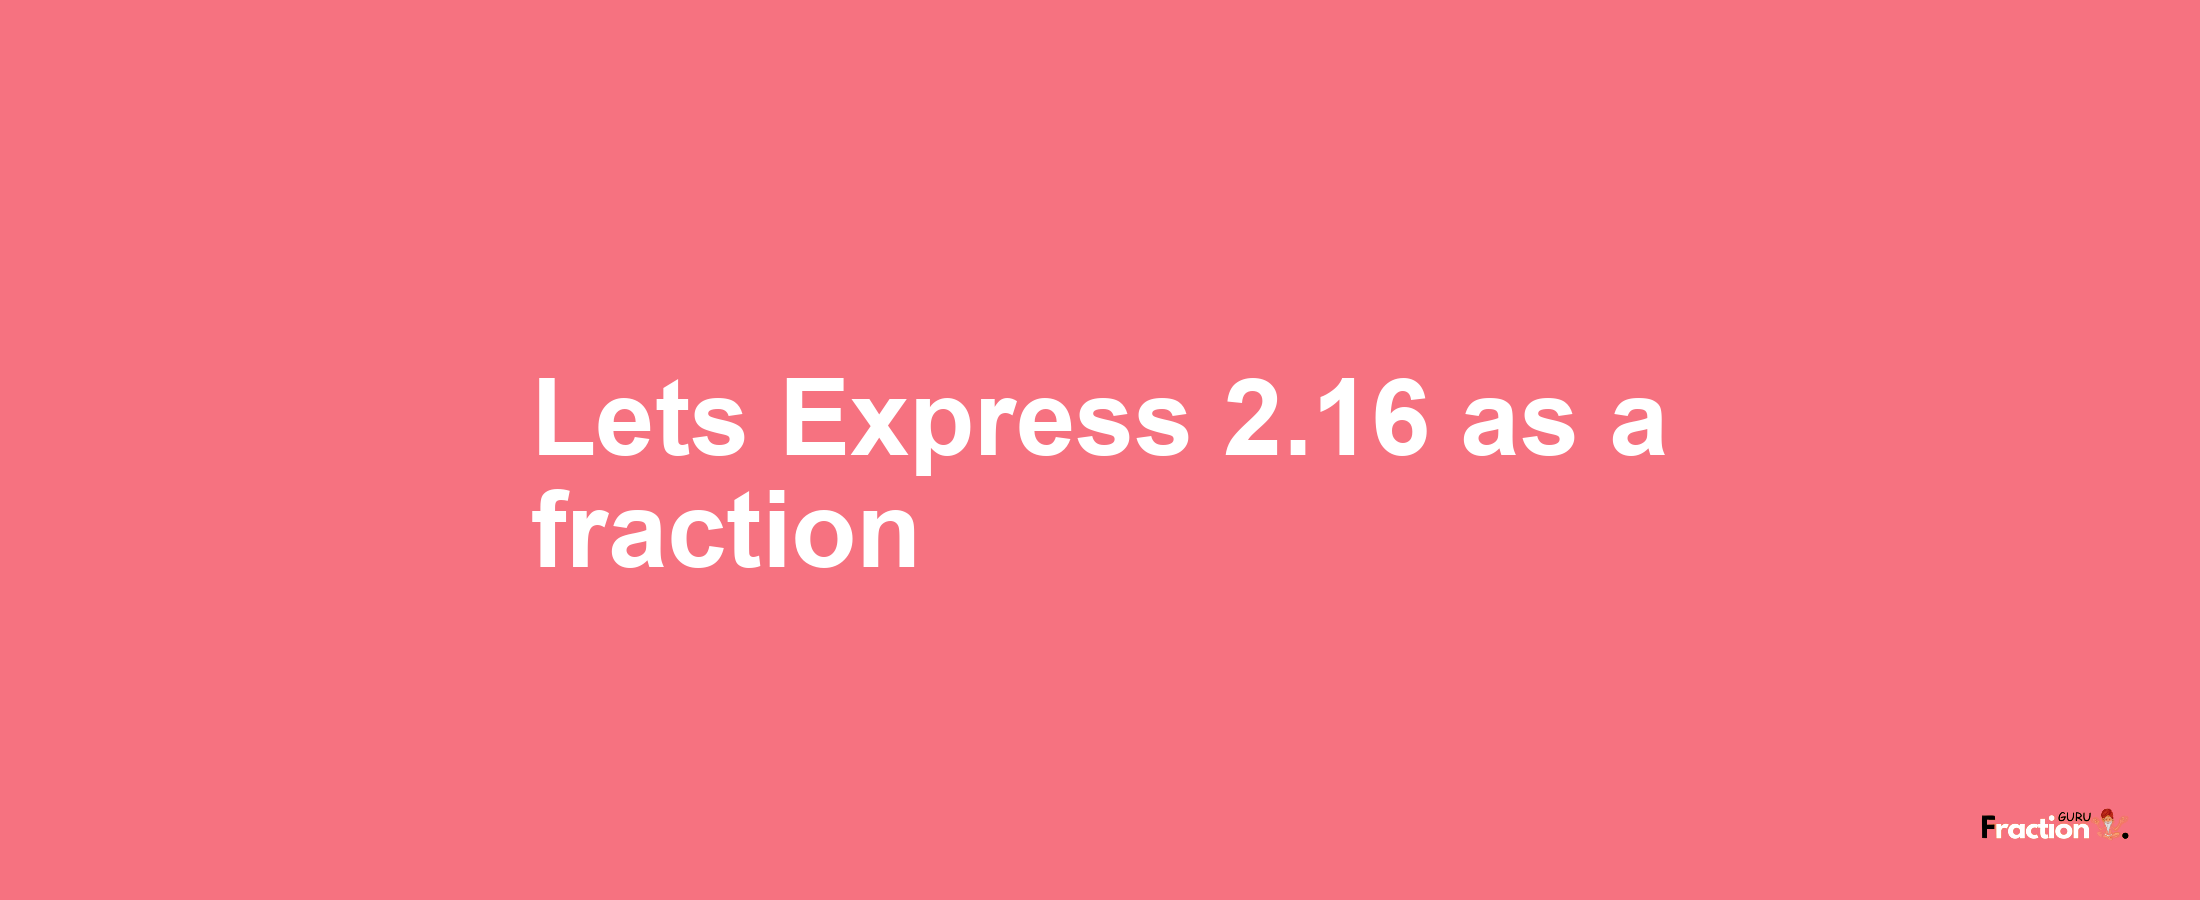 Lets Express 2.16 as afraction